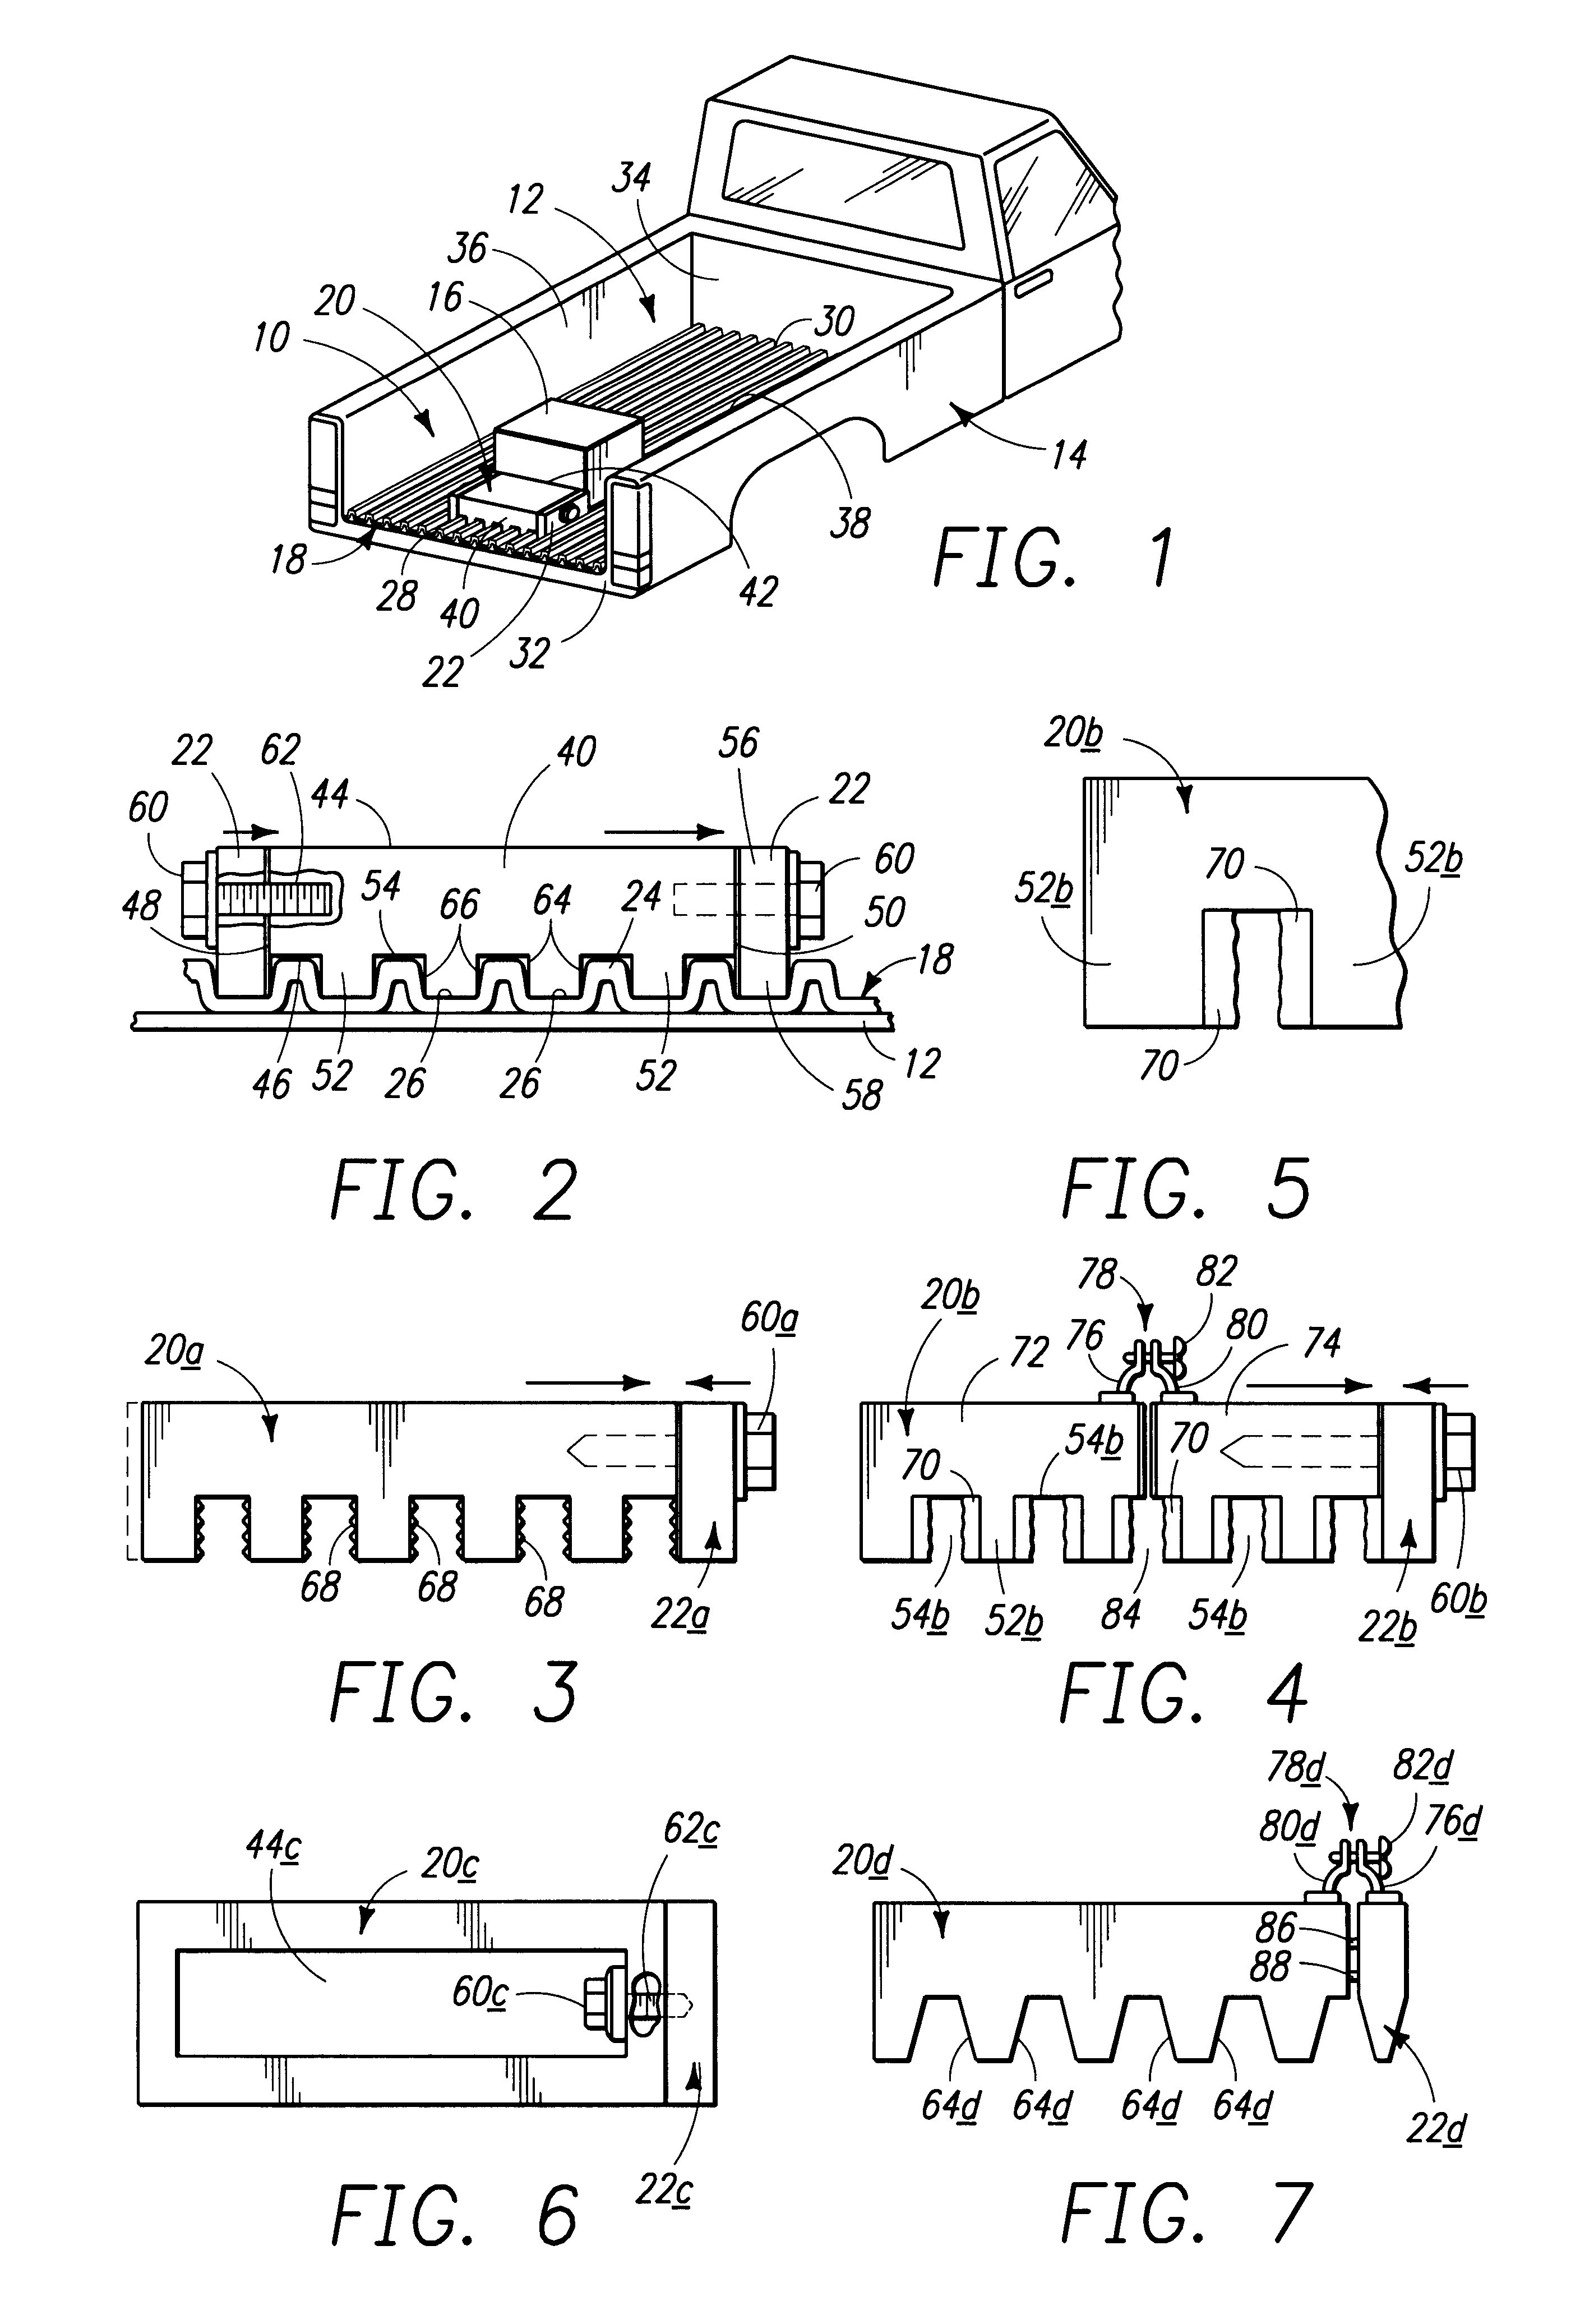 Cargo restraint assembly for a vehicle cargo bed